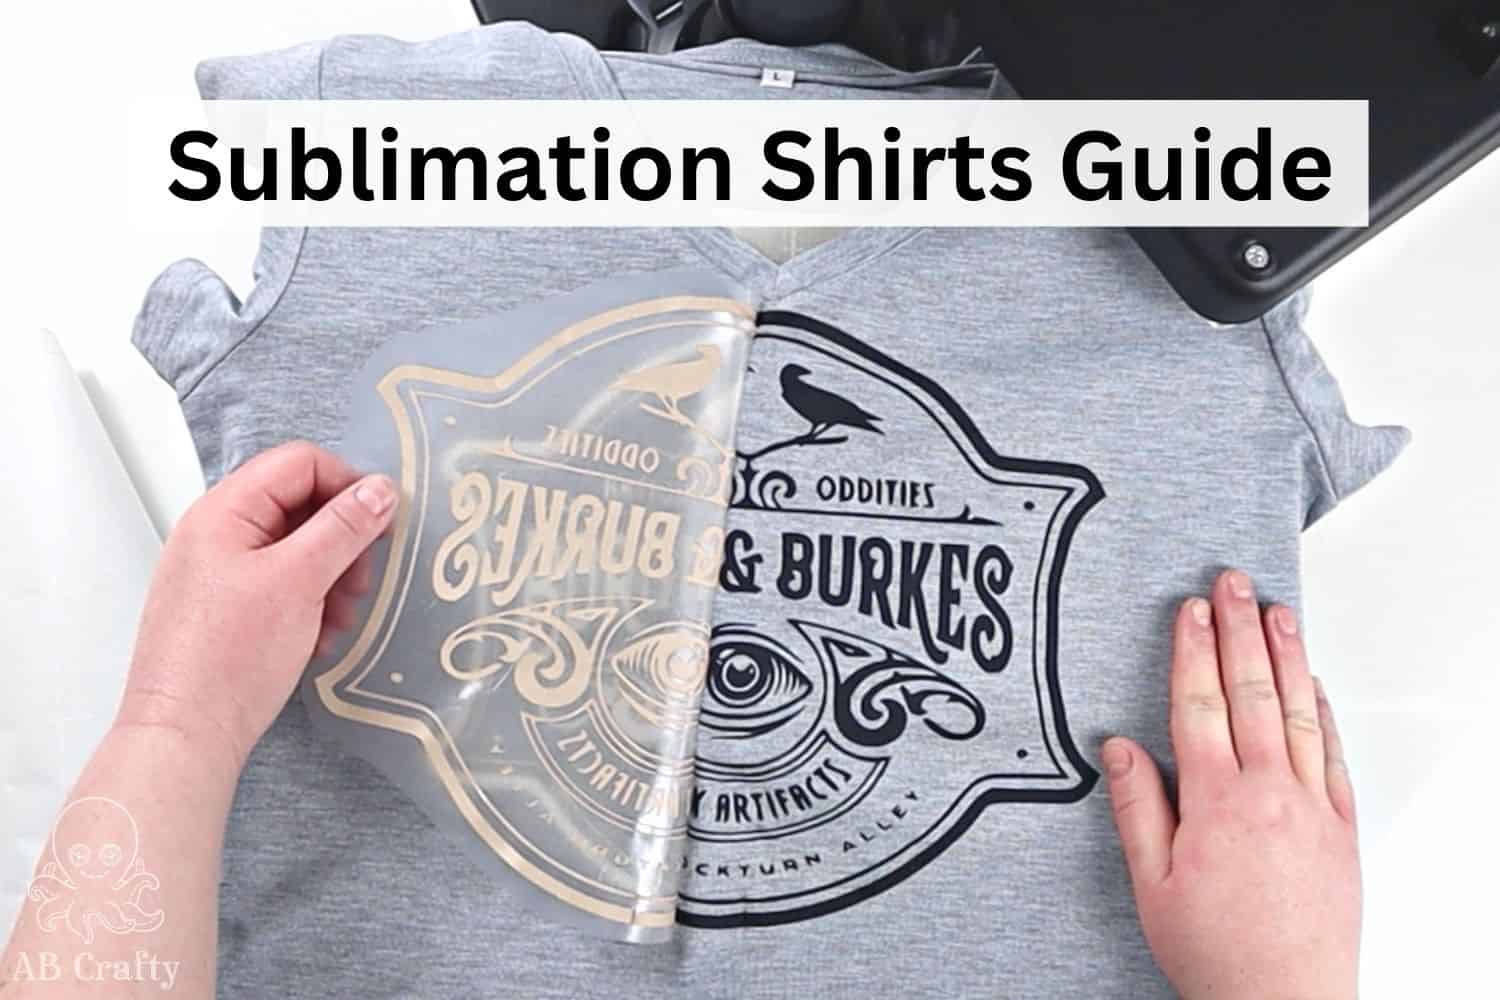 Sublimation Shirts - Beginner's Guide to Sublimation - AB Crafty